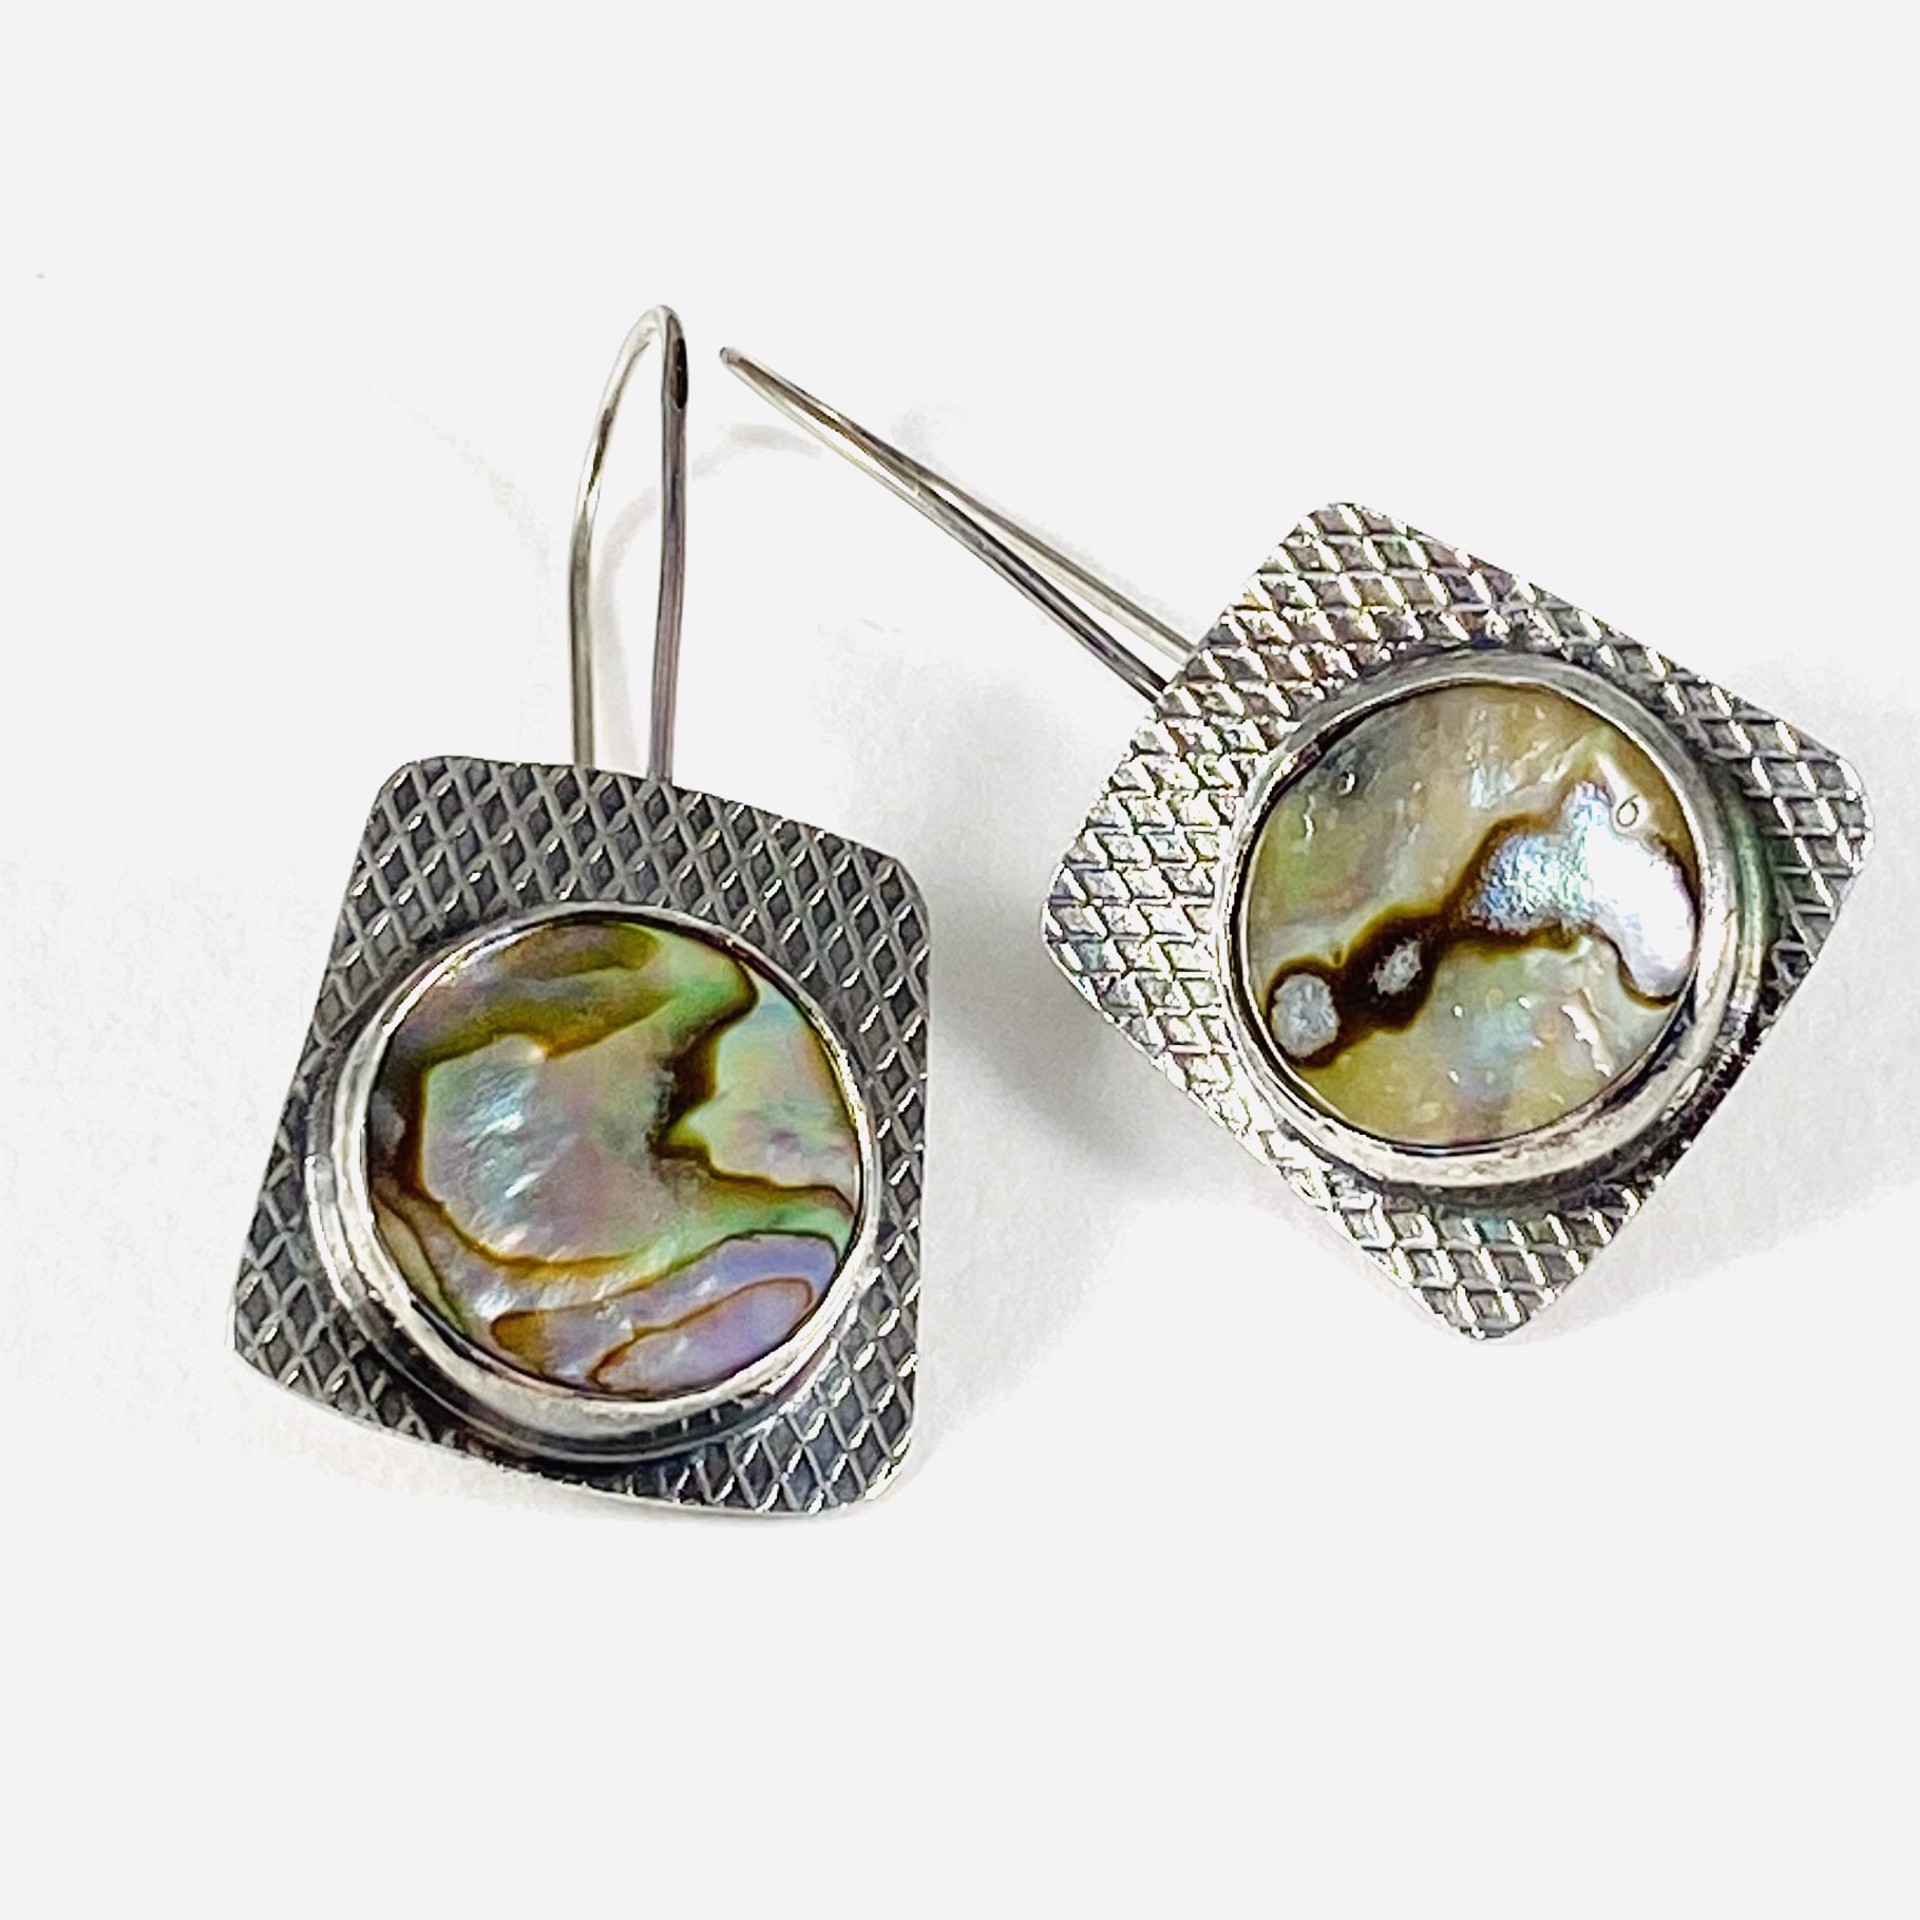 Hand Stamped Sterling Abalone Shell Earrings AB21-58 by Anne Bivens